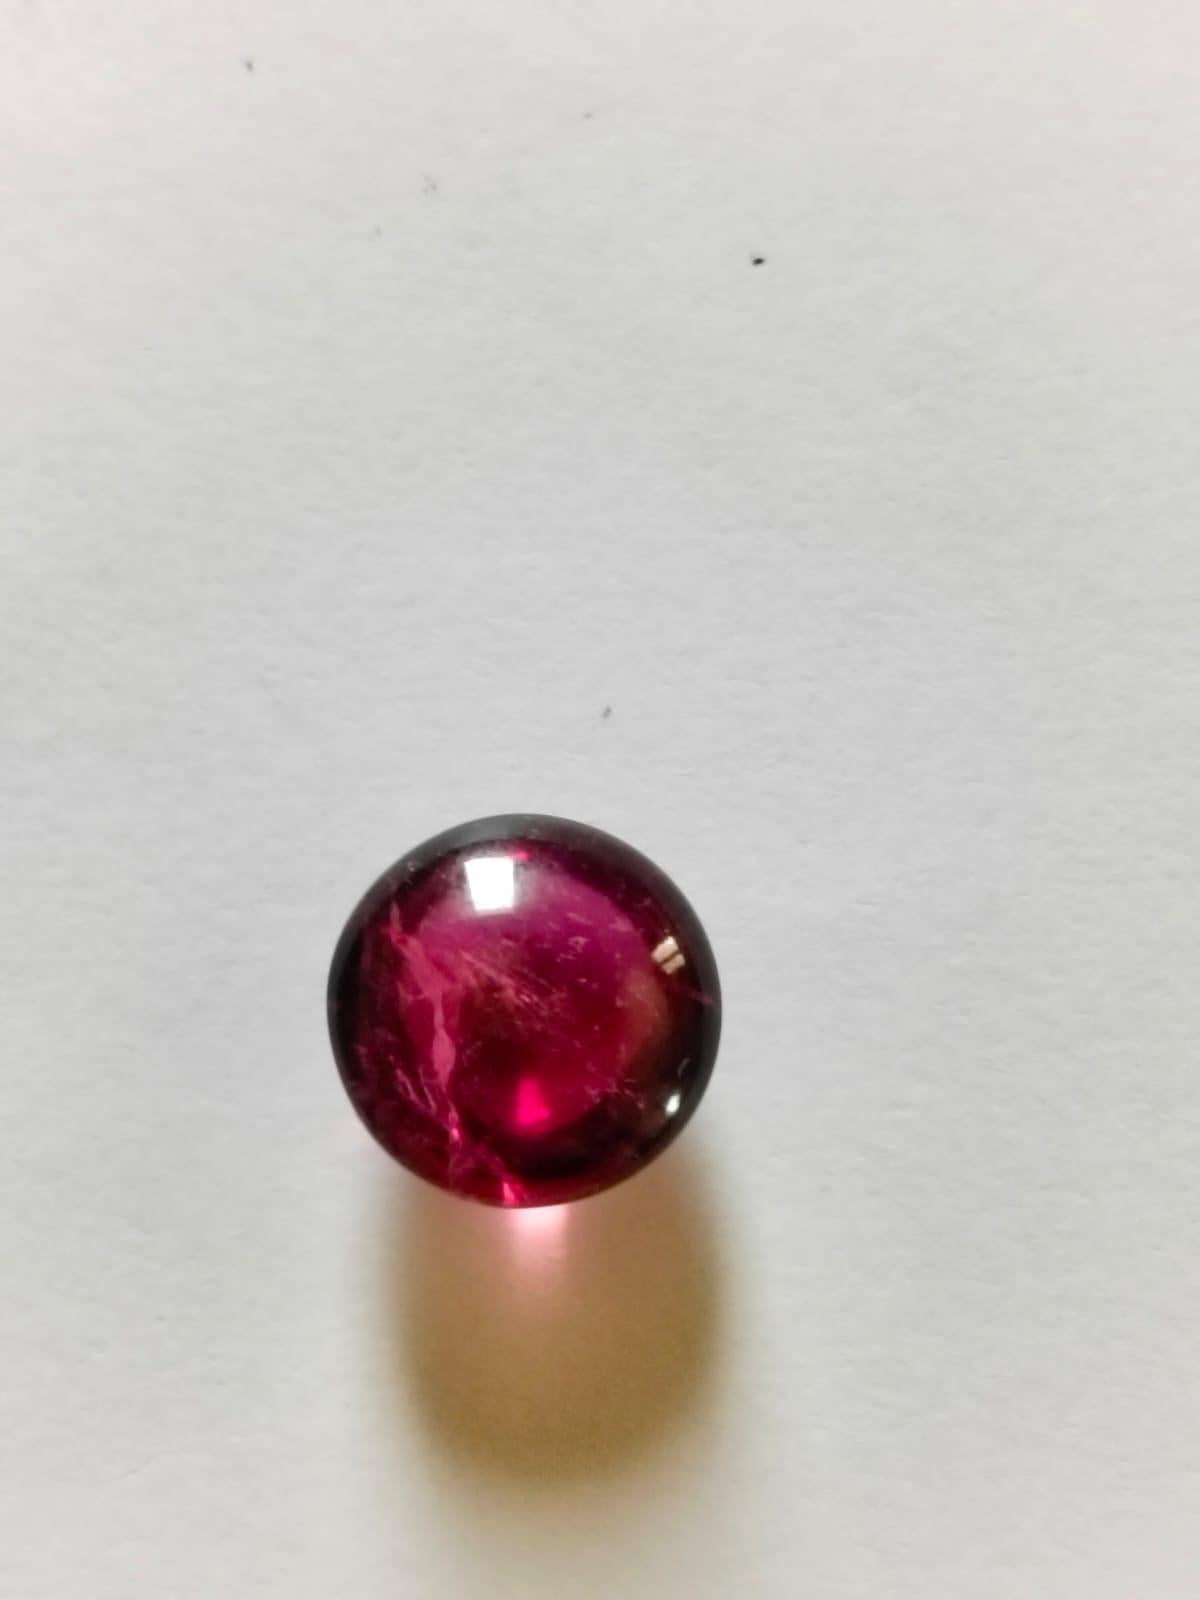 Natural Rubellite Cabochon Round Cut Gemstone.
15.41 Carat with a elegant Red color and excellent clarity. Also has an excellent fancy Round cut with ideal polish to show great shine and color . It will look authentic in jewelry. The dimensions of